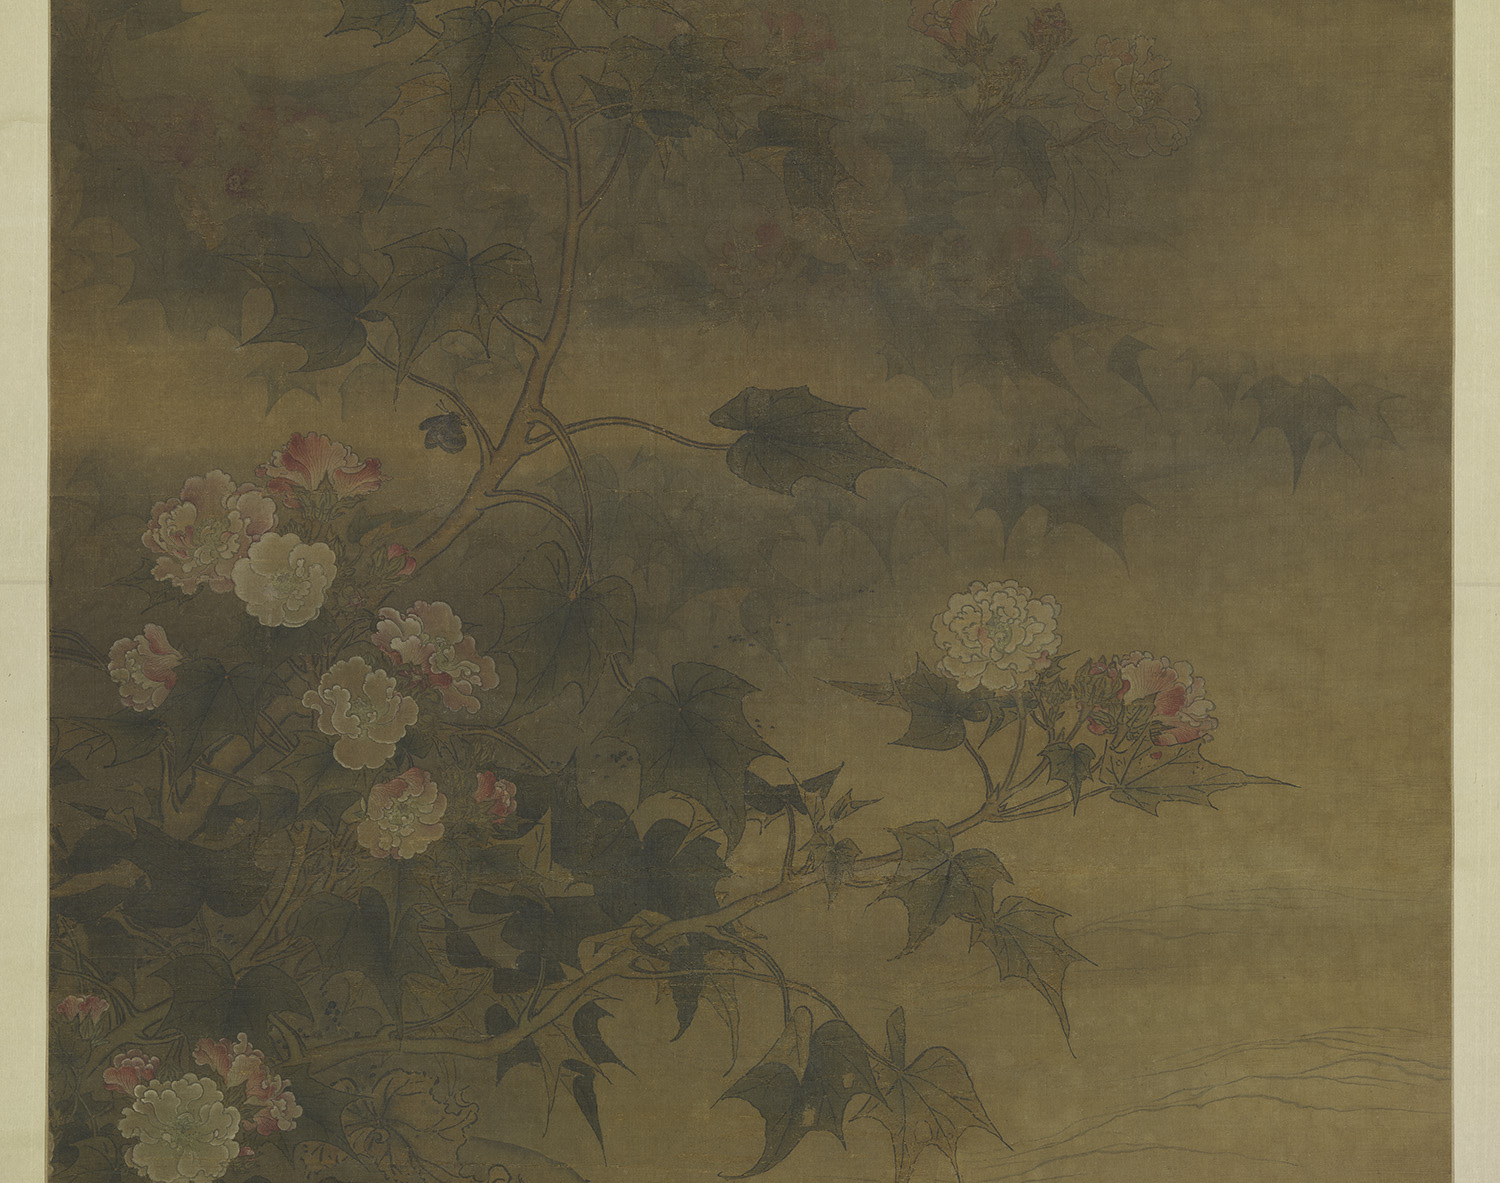 Hibiscus at Dawn Ma Lin, Song dynasty